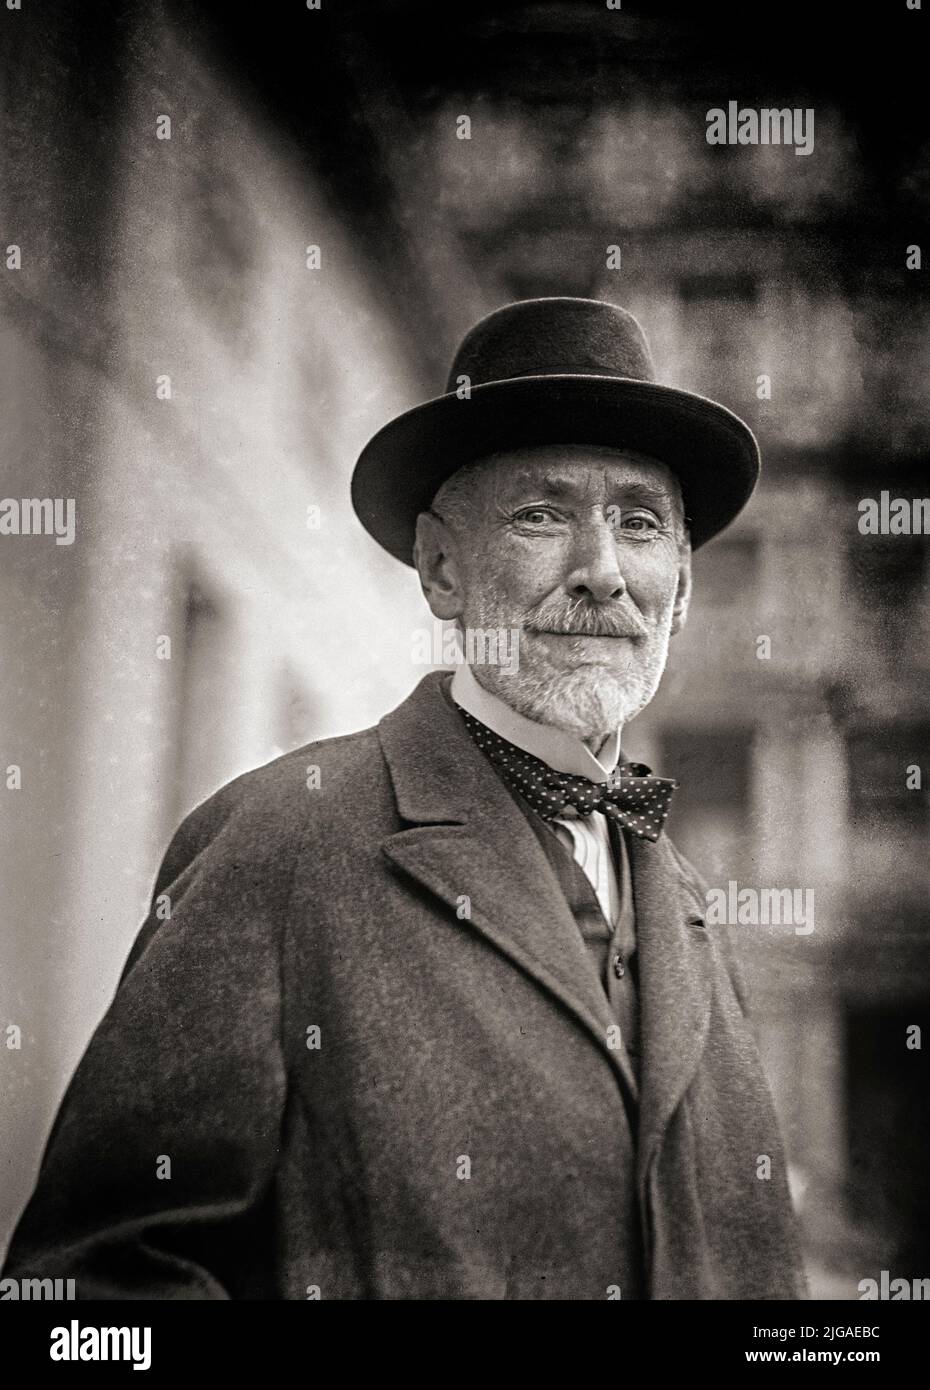 Sir Horace Plunkett (1854-1932), was an Anglo-Irish agricultural reformer, pioneer of agricultural cooperatives, Unionist MP, supporter of Home Rule, Irish Senator and author. An adherent of Home Rule, in 1919 he founded the Irish Dominion League, still aiming to keep Ireland united, and in 1922 he became a member of the first formation of Seanad Éireann, the upper chamber in the Parliament of the new Irish Free State. He has been described as a Christian socialist. Stock Photo